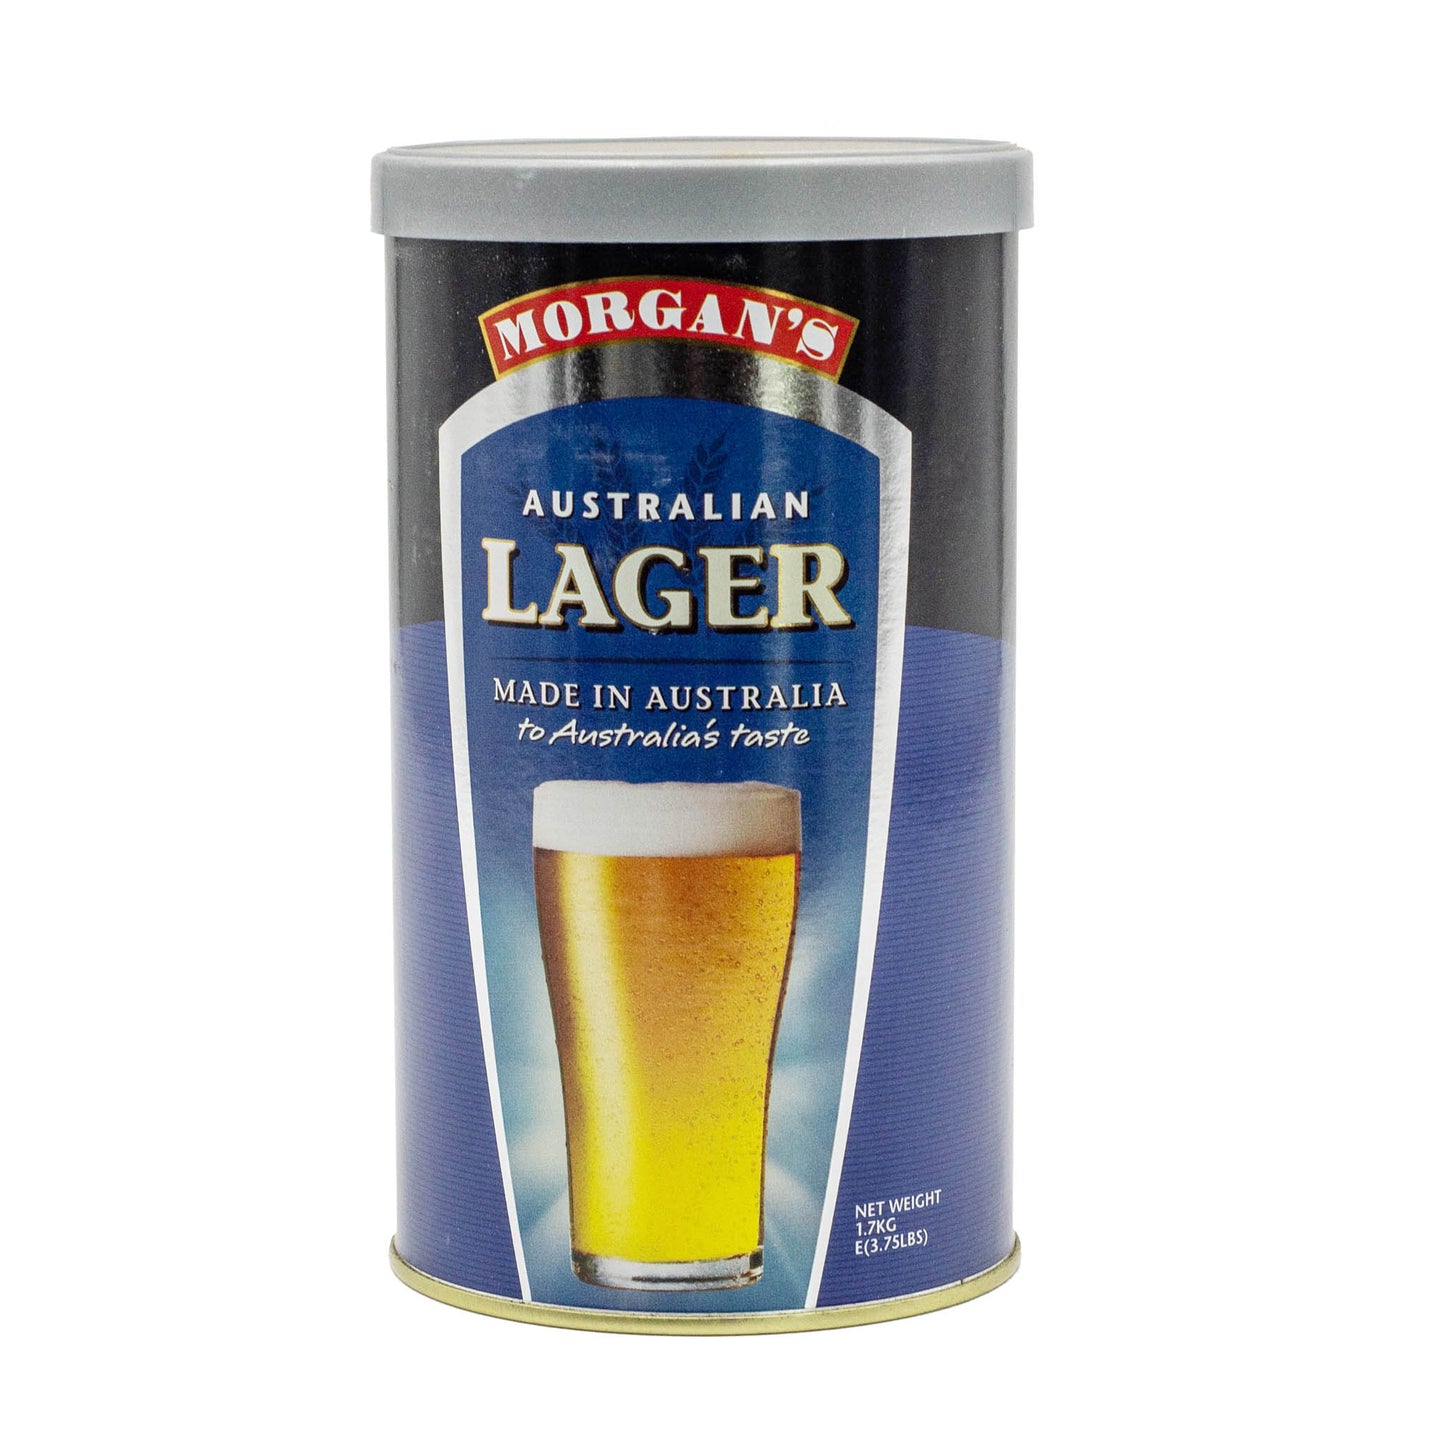 Morgans Australian lager brew tin makes a crisp and bold in flavour beer with a refreshing clean head and golden colour